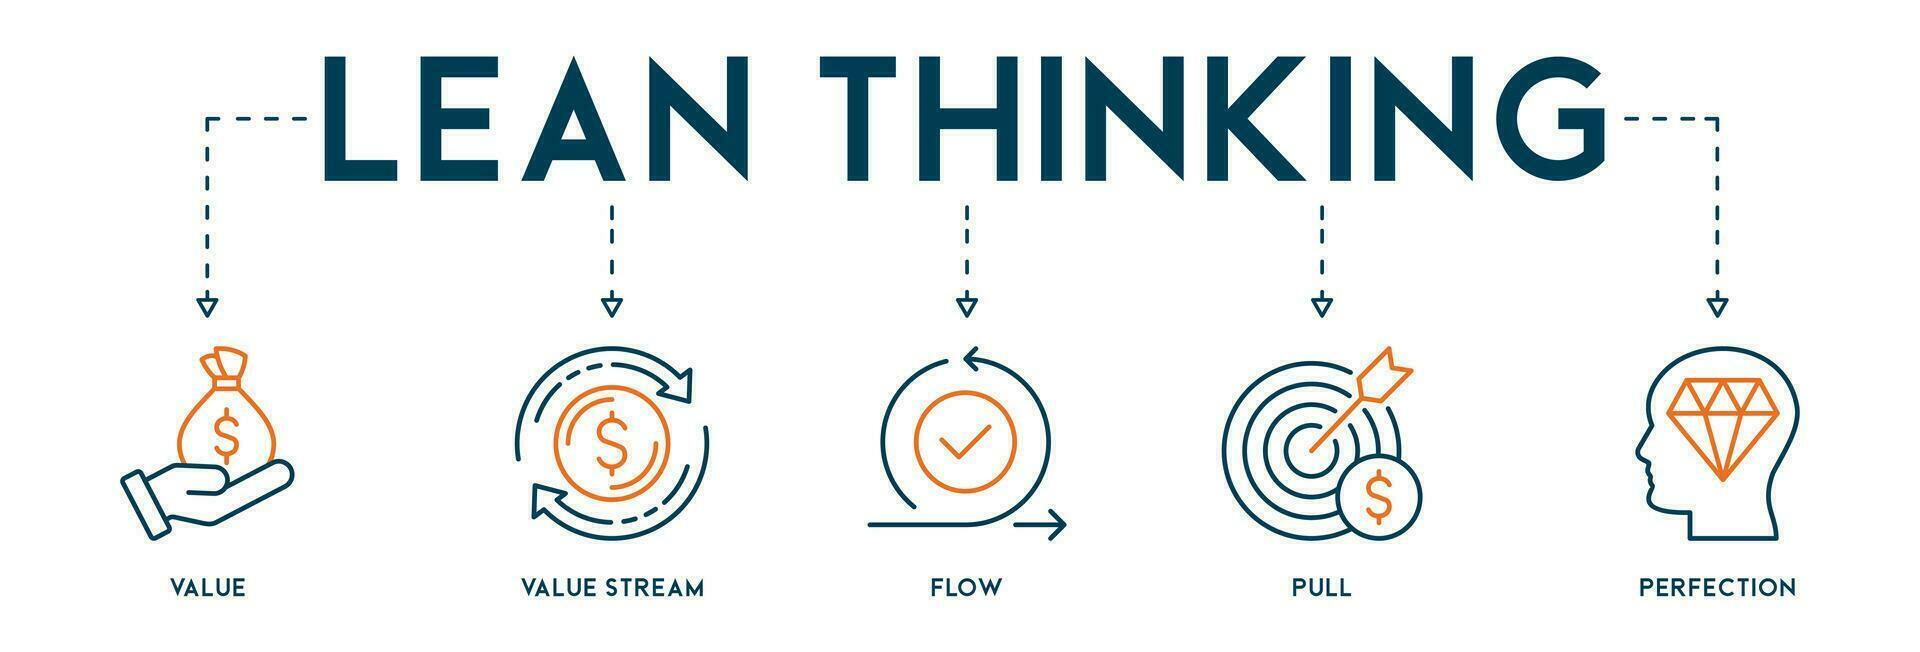 Lean thinking concept banner web editable illustration with define value, value stream, create flow, established pull, and perfection icon vector